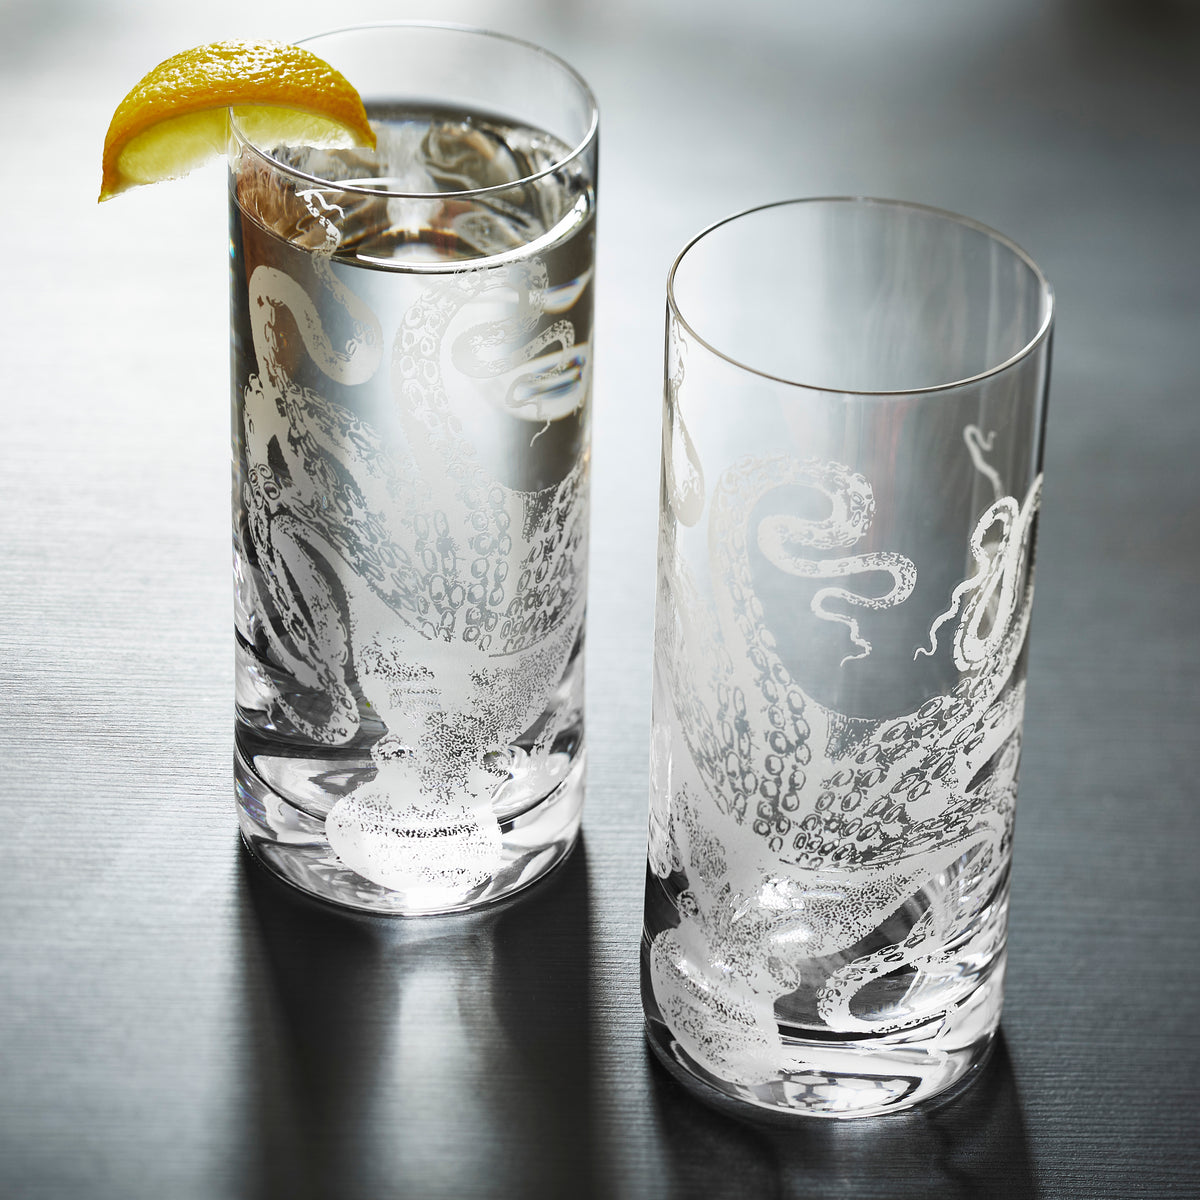 Lucy the Octopus Tall Cocktail Glasses sold as a set of 2 in hand-etched lead-free crystal barware from Caskata. One is shown full of water and garnished with a slice of lemon, the other is empty.